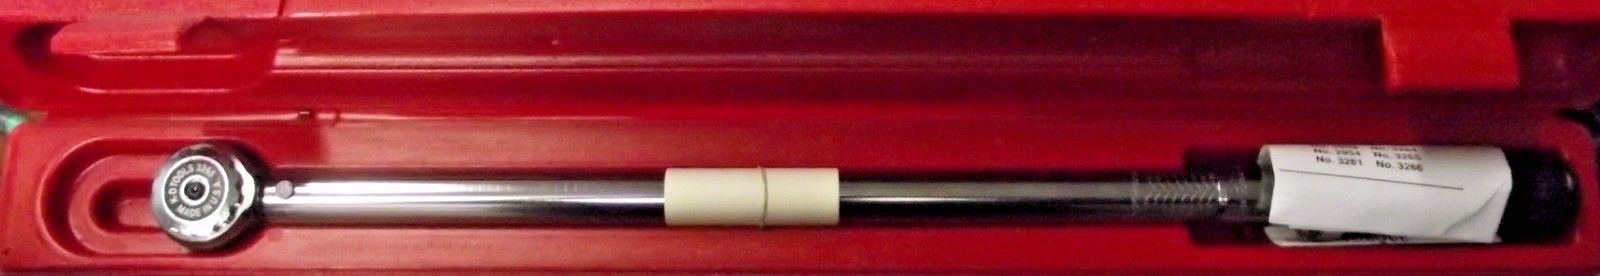 KD Tools 3265D Micrometer Torque Wrench 10-150 Ft/Lbs With Case USA